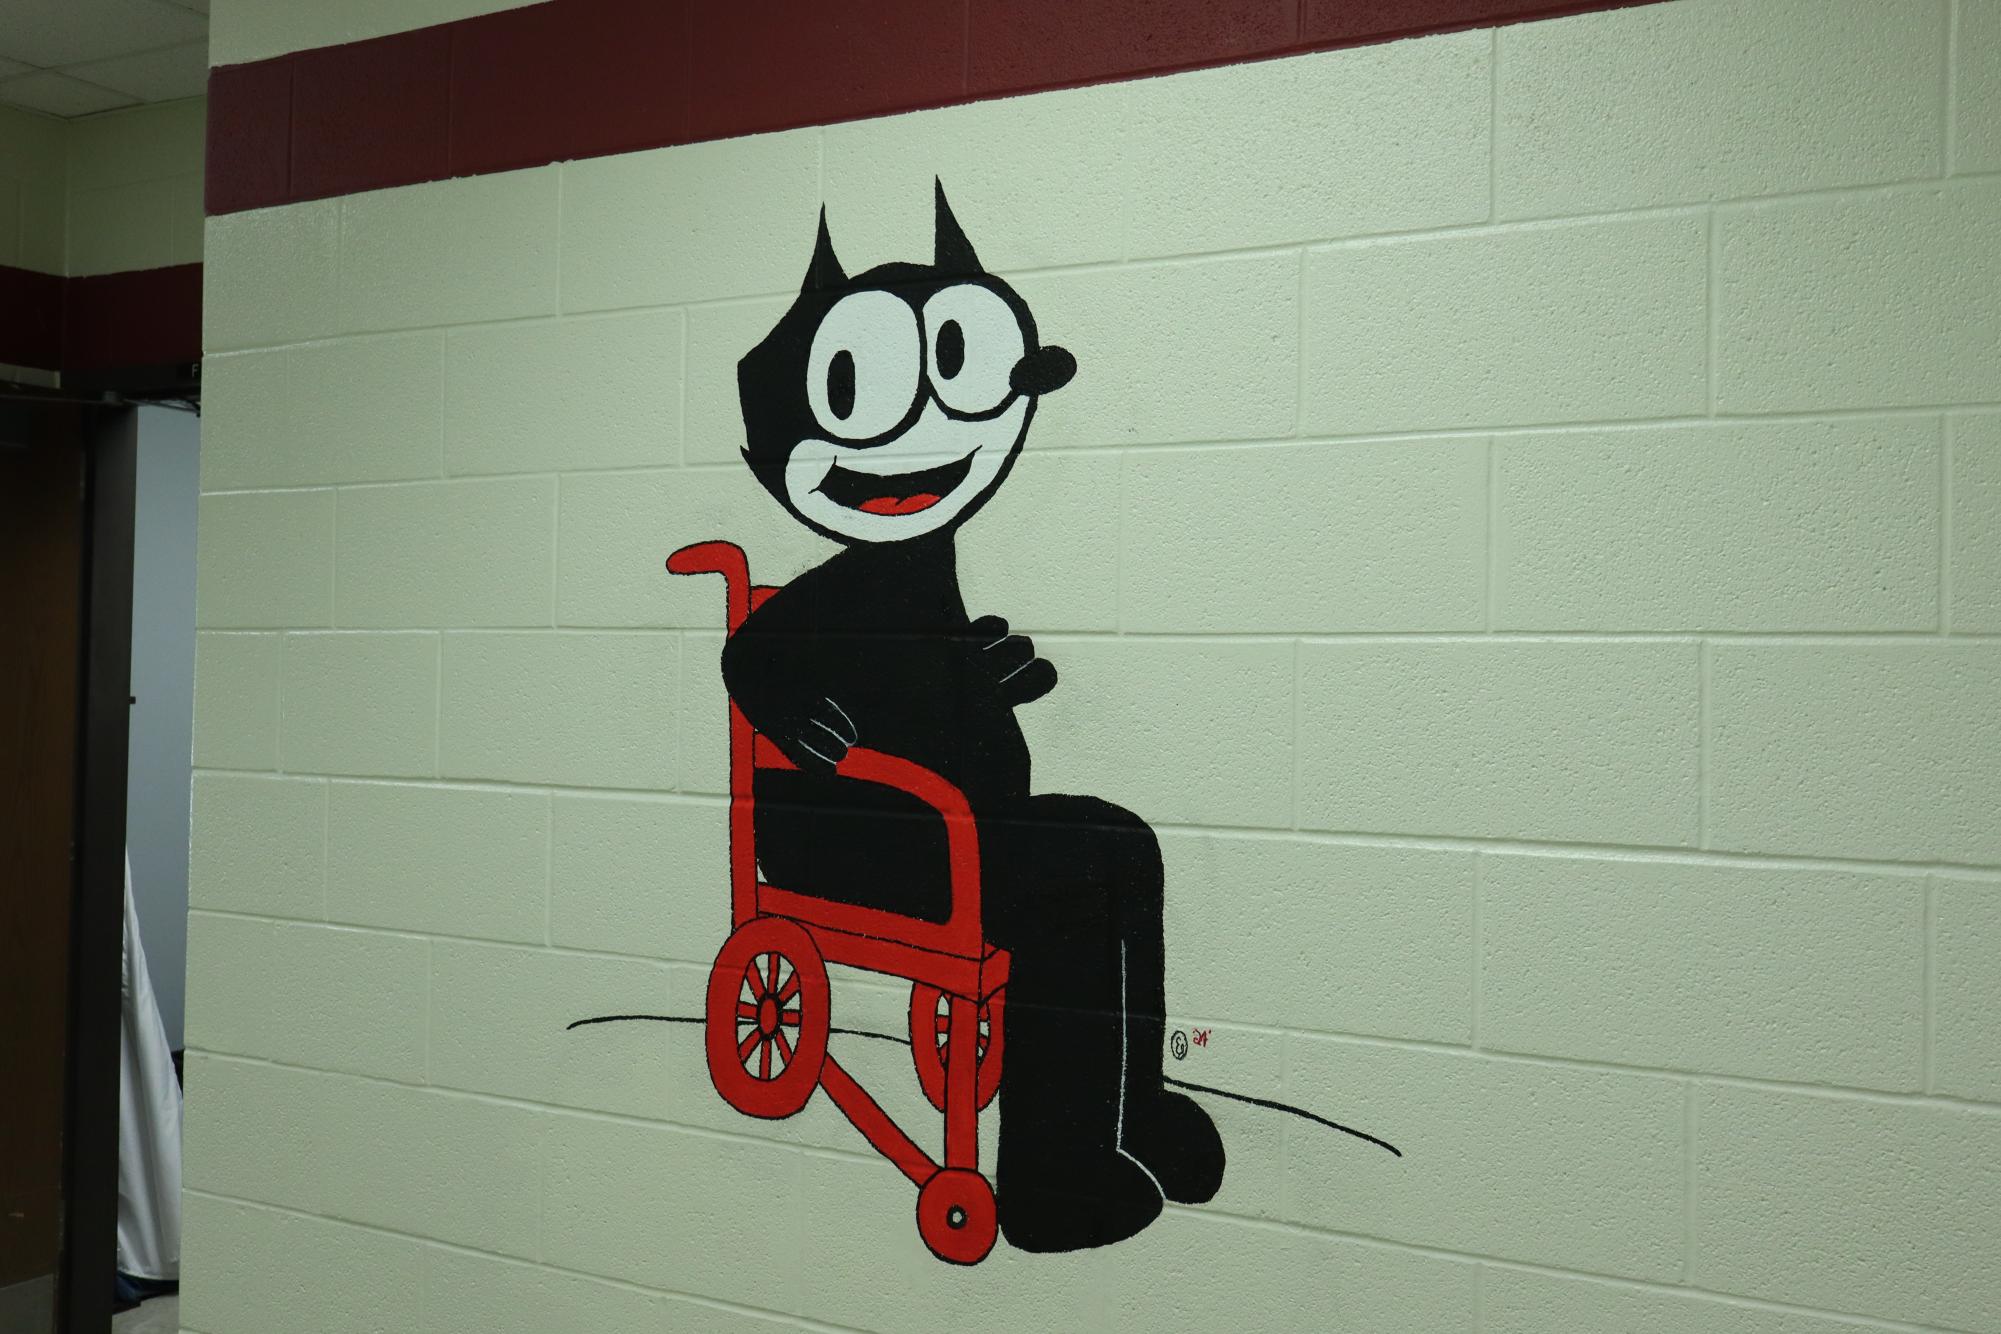 This new mural is one of three in the Special Education hallway. All are meant to give special needs students more representation.